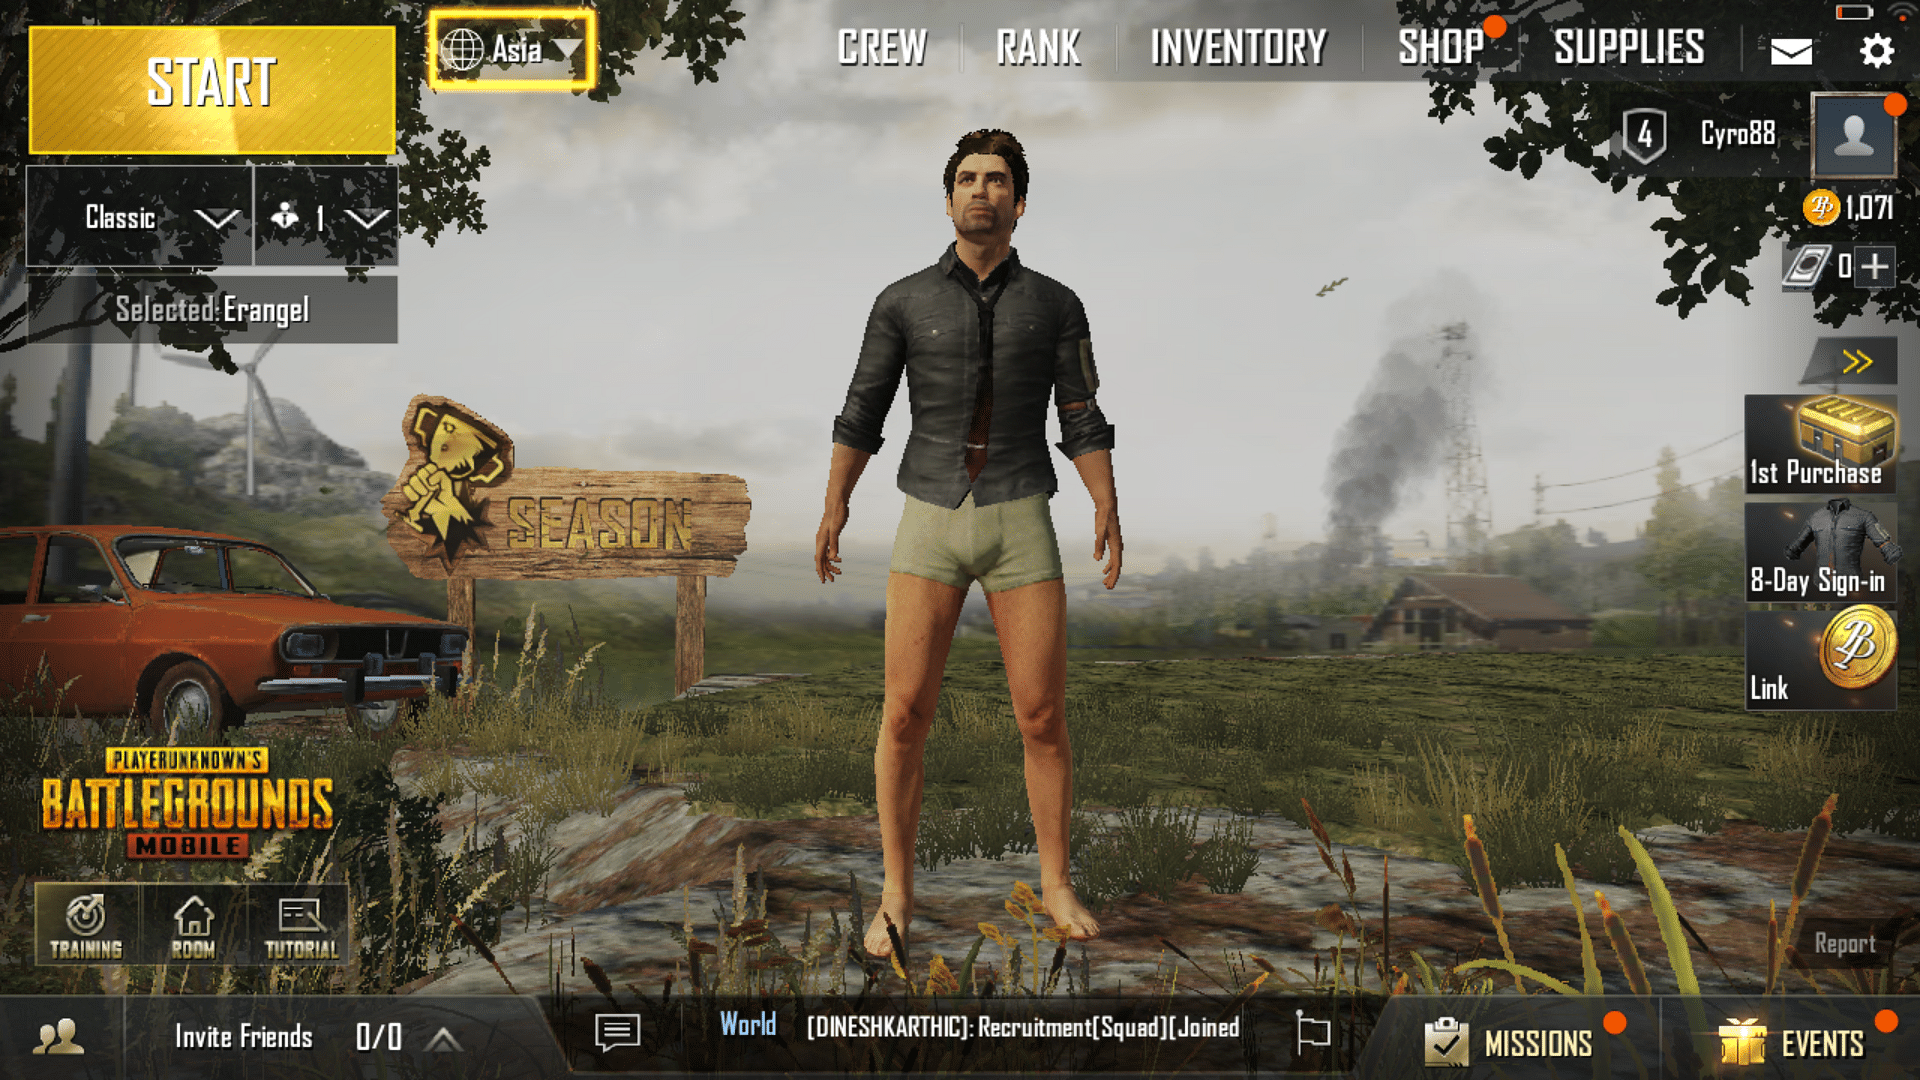 PUBG is a popular online multiplayer game for mobile, PS4 and PC.